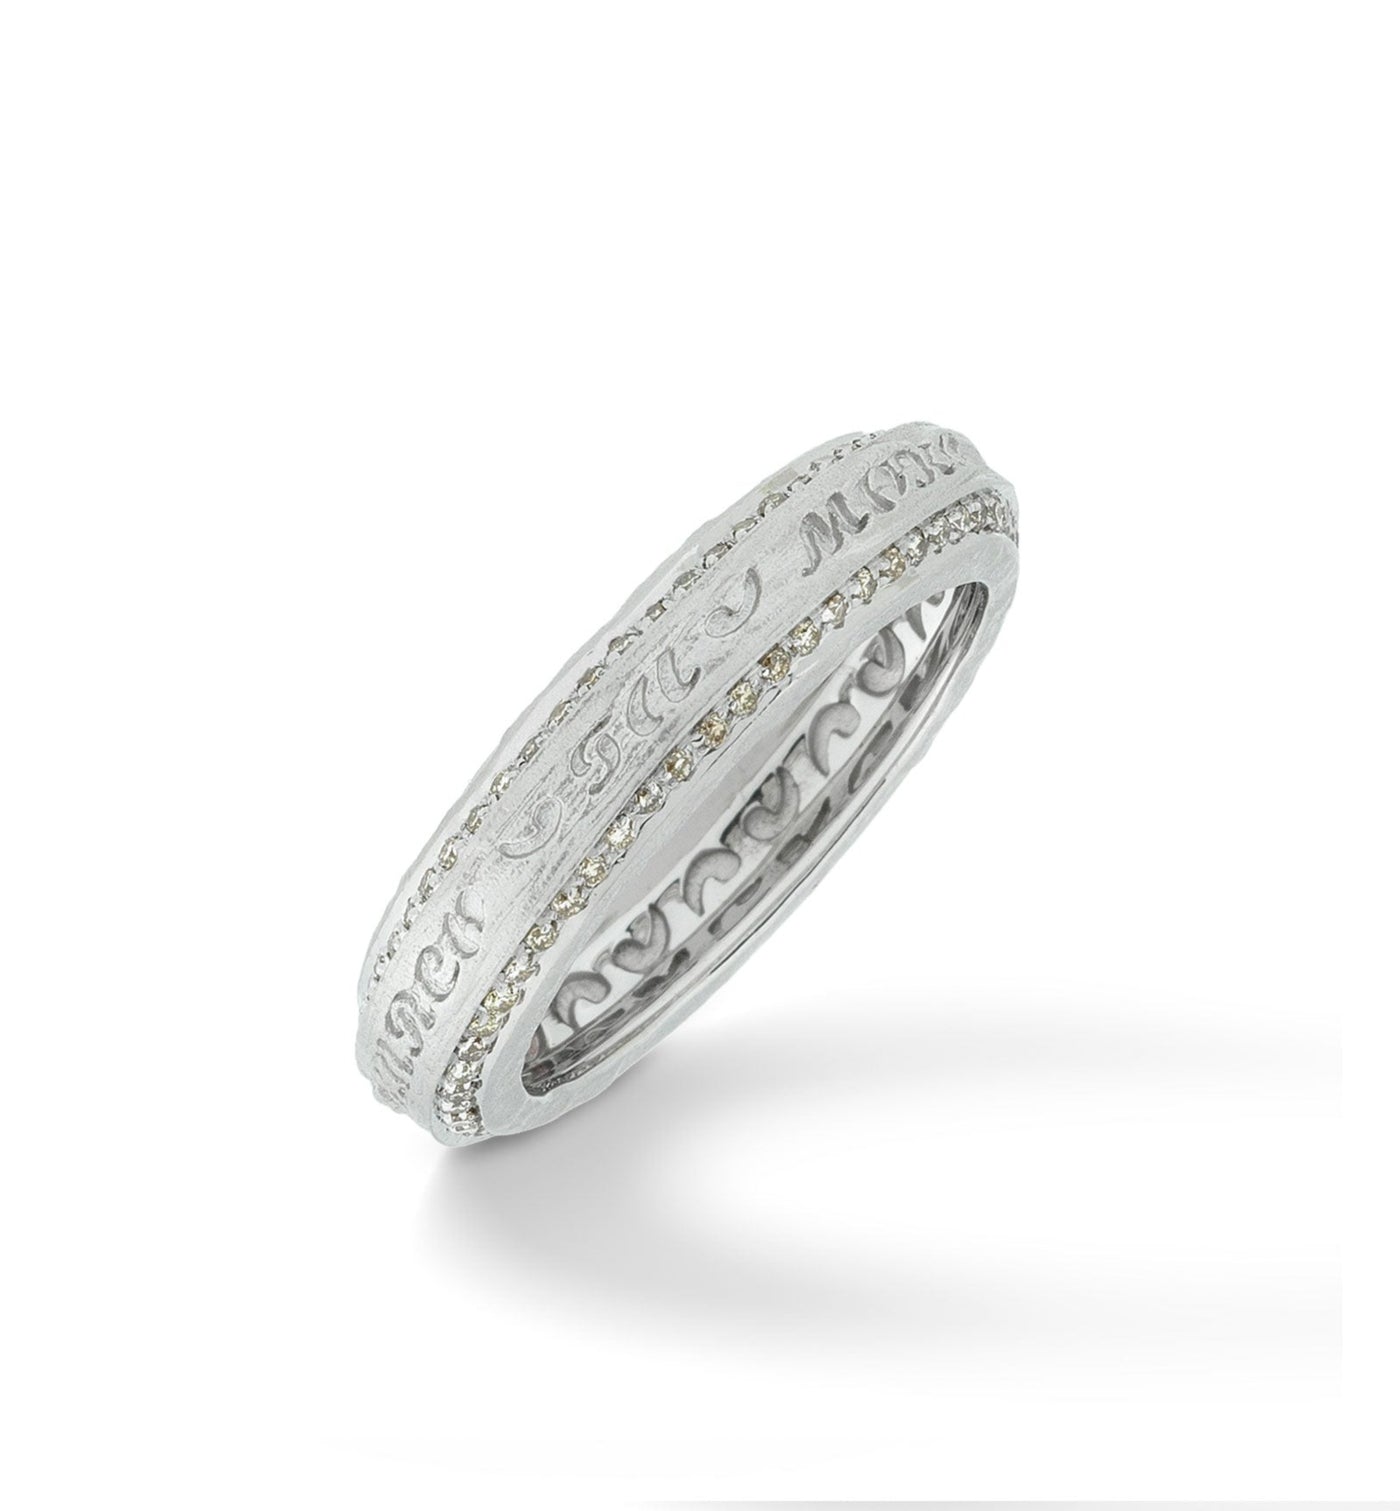 The Other Half Narrow II Ring with Champagne Diamonds with 18kt White Gold